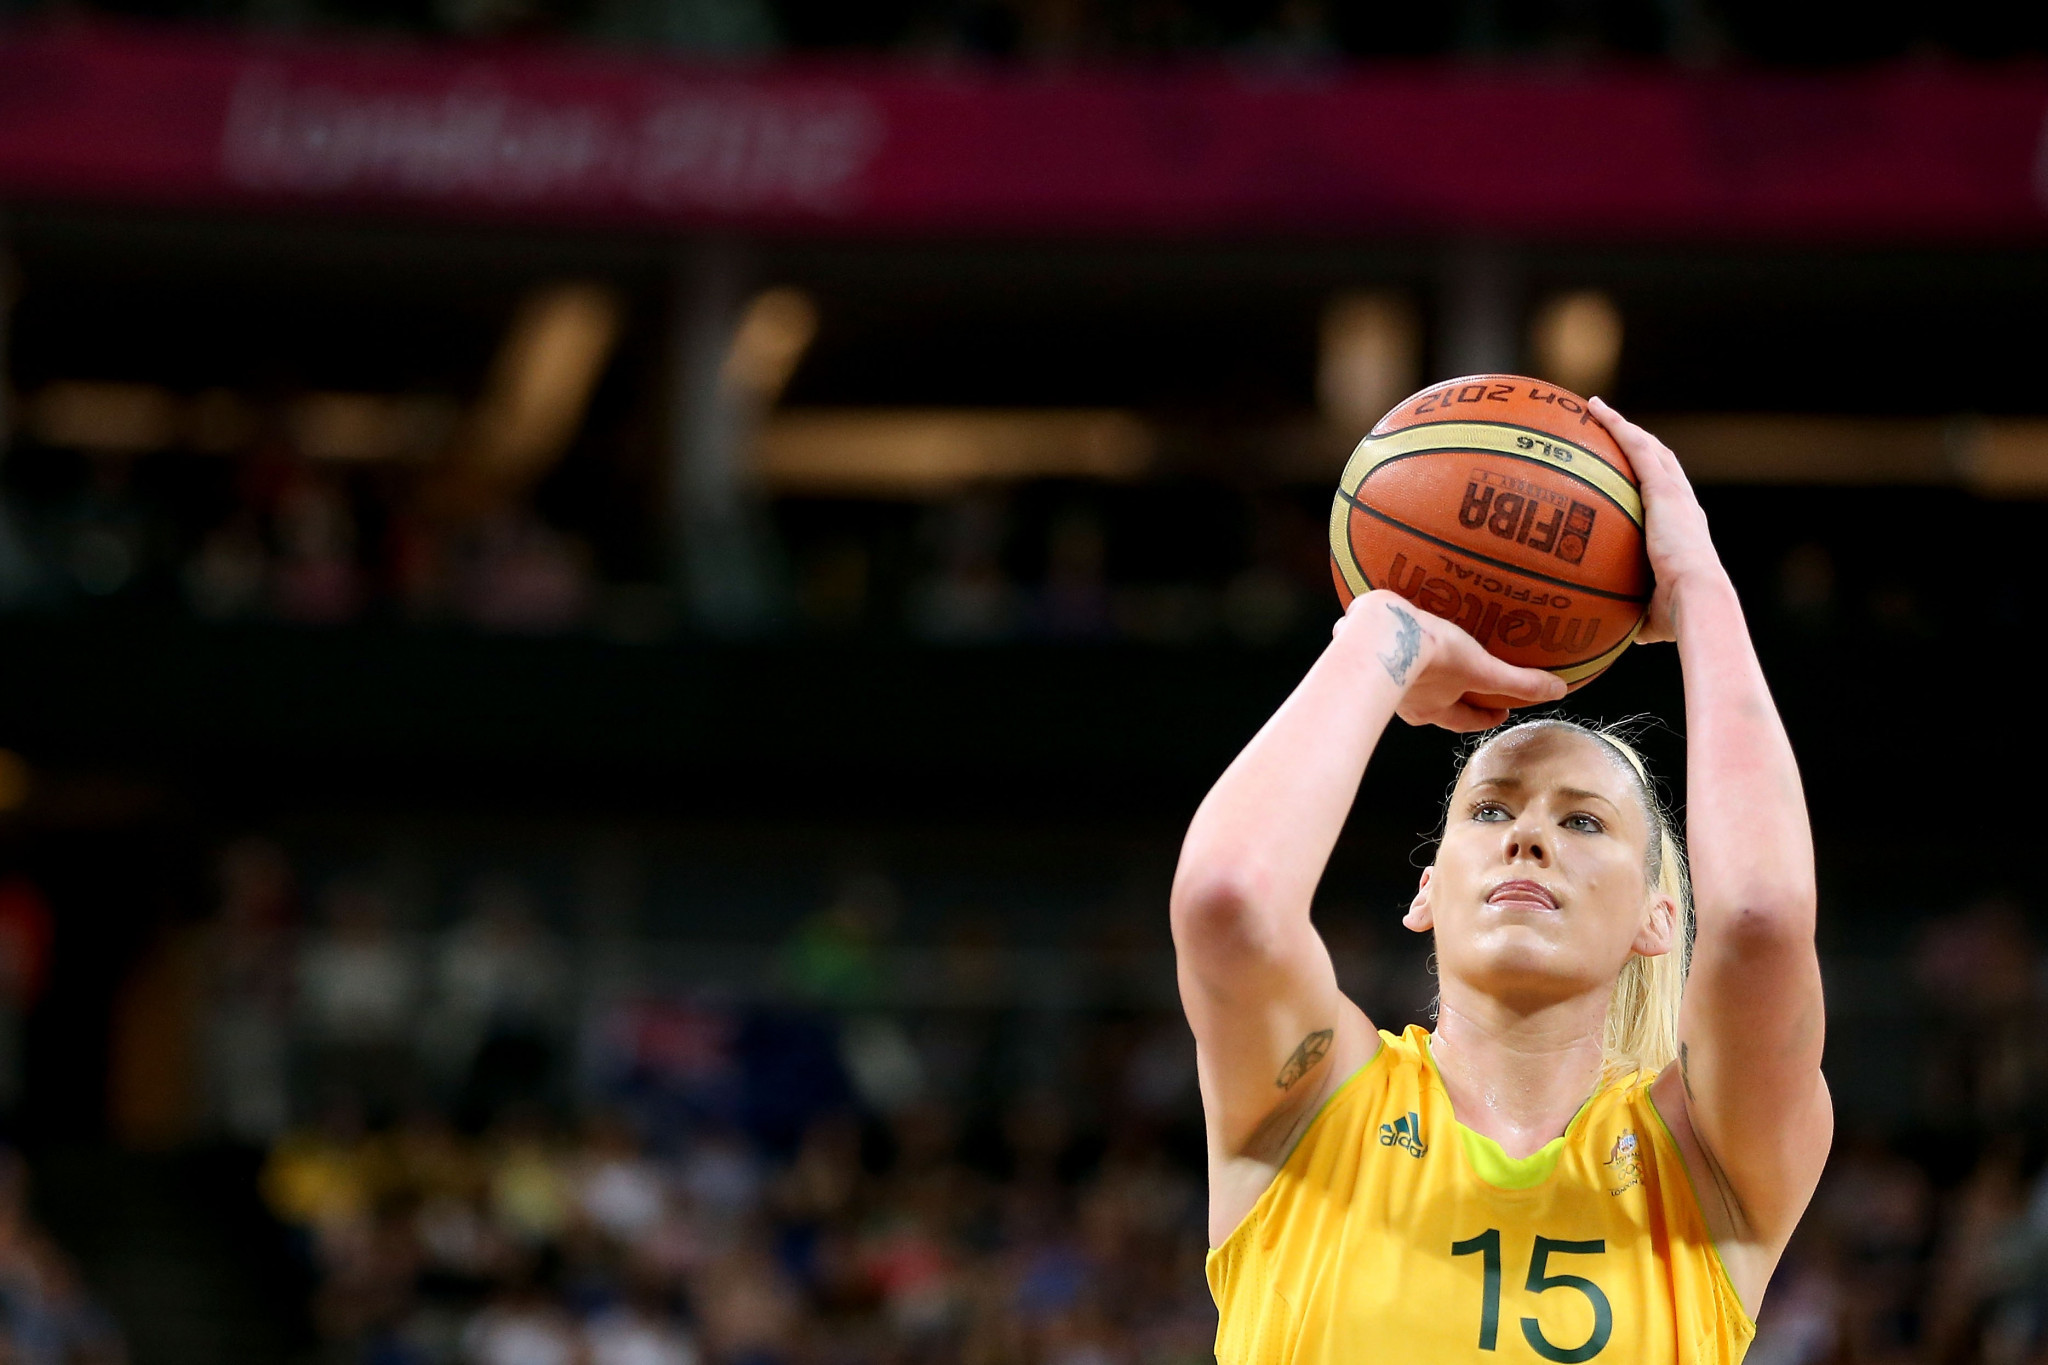 Jackson comes out of retirement to play for Australia at Women's Basketball World Cup